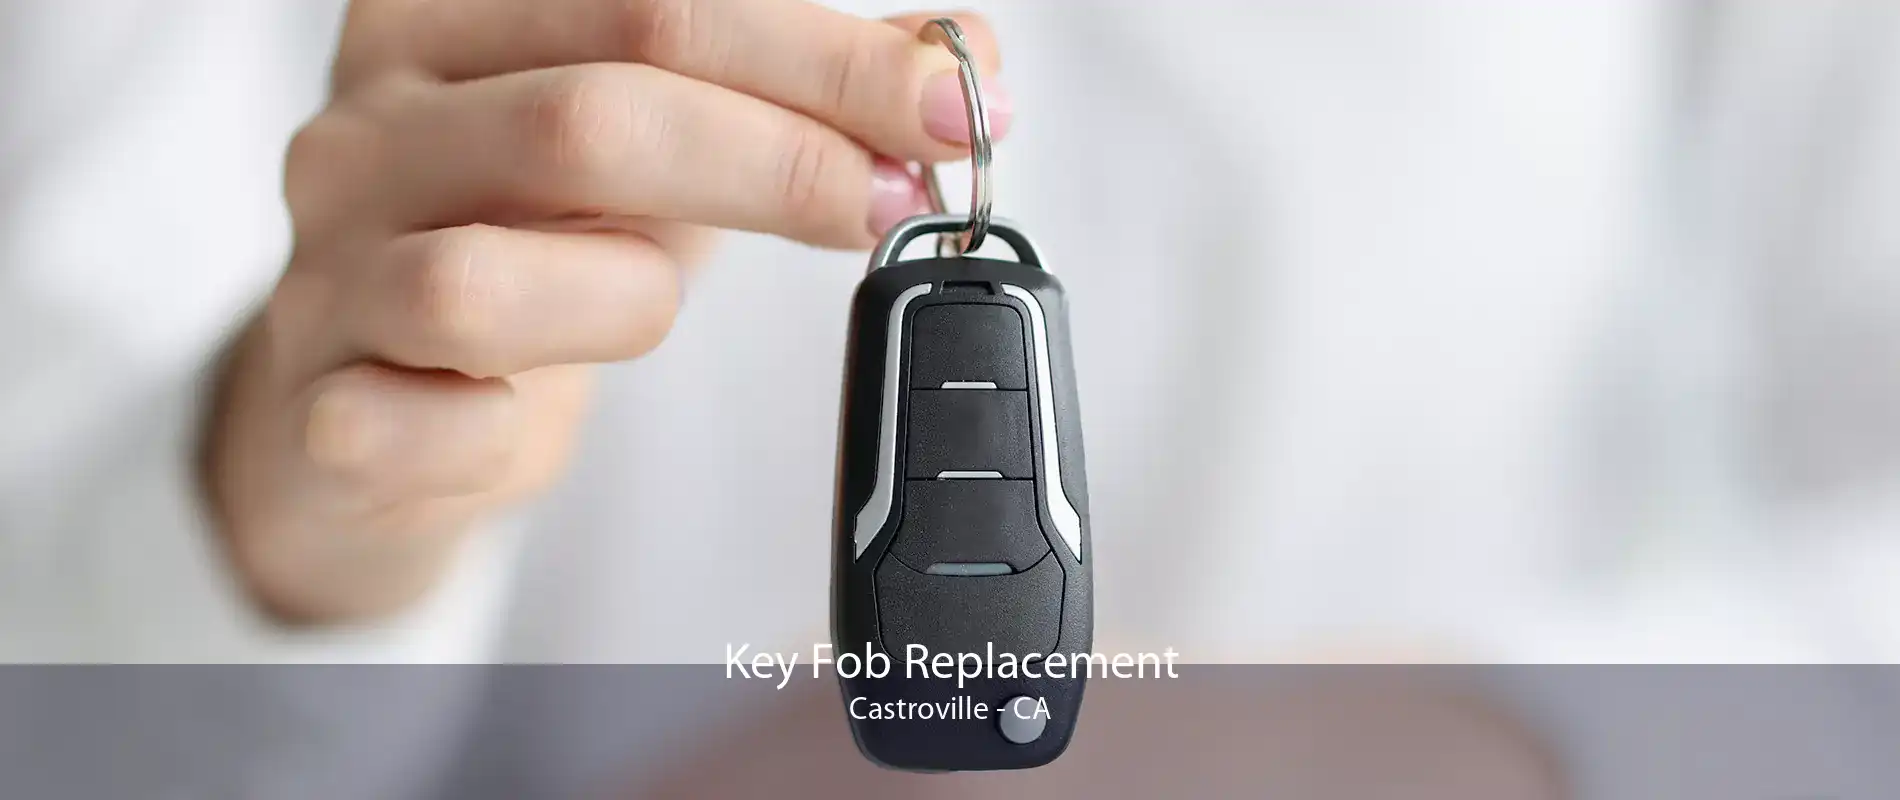 Key Fob Replacement Castroville - CA